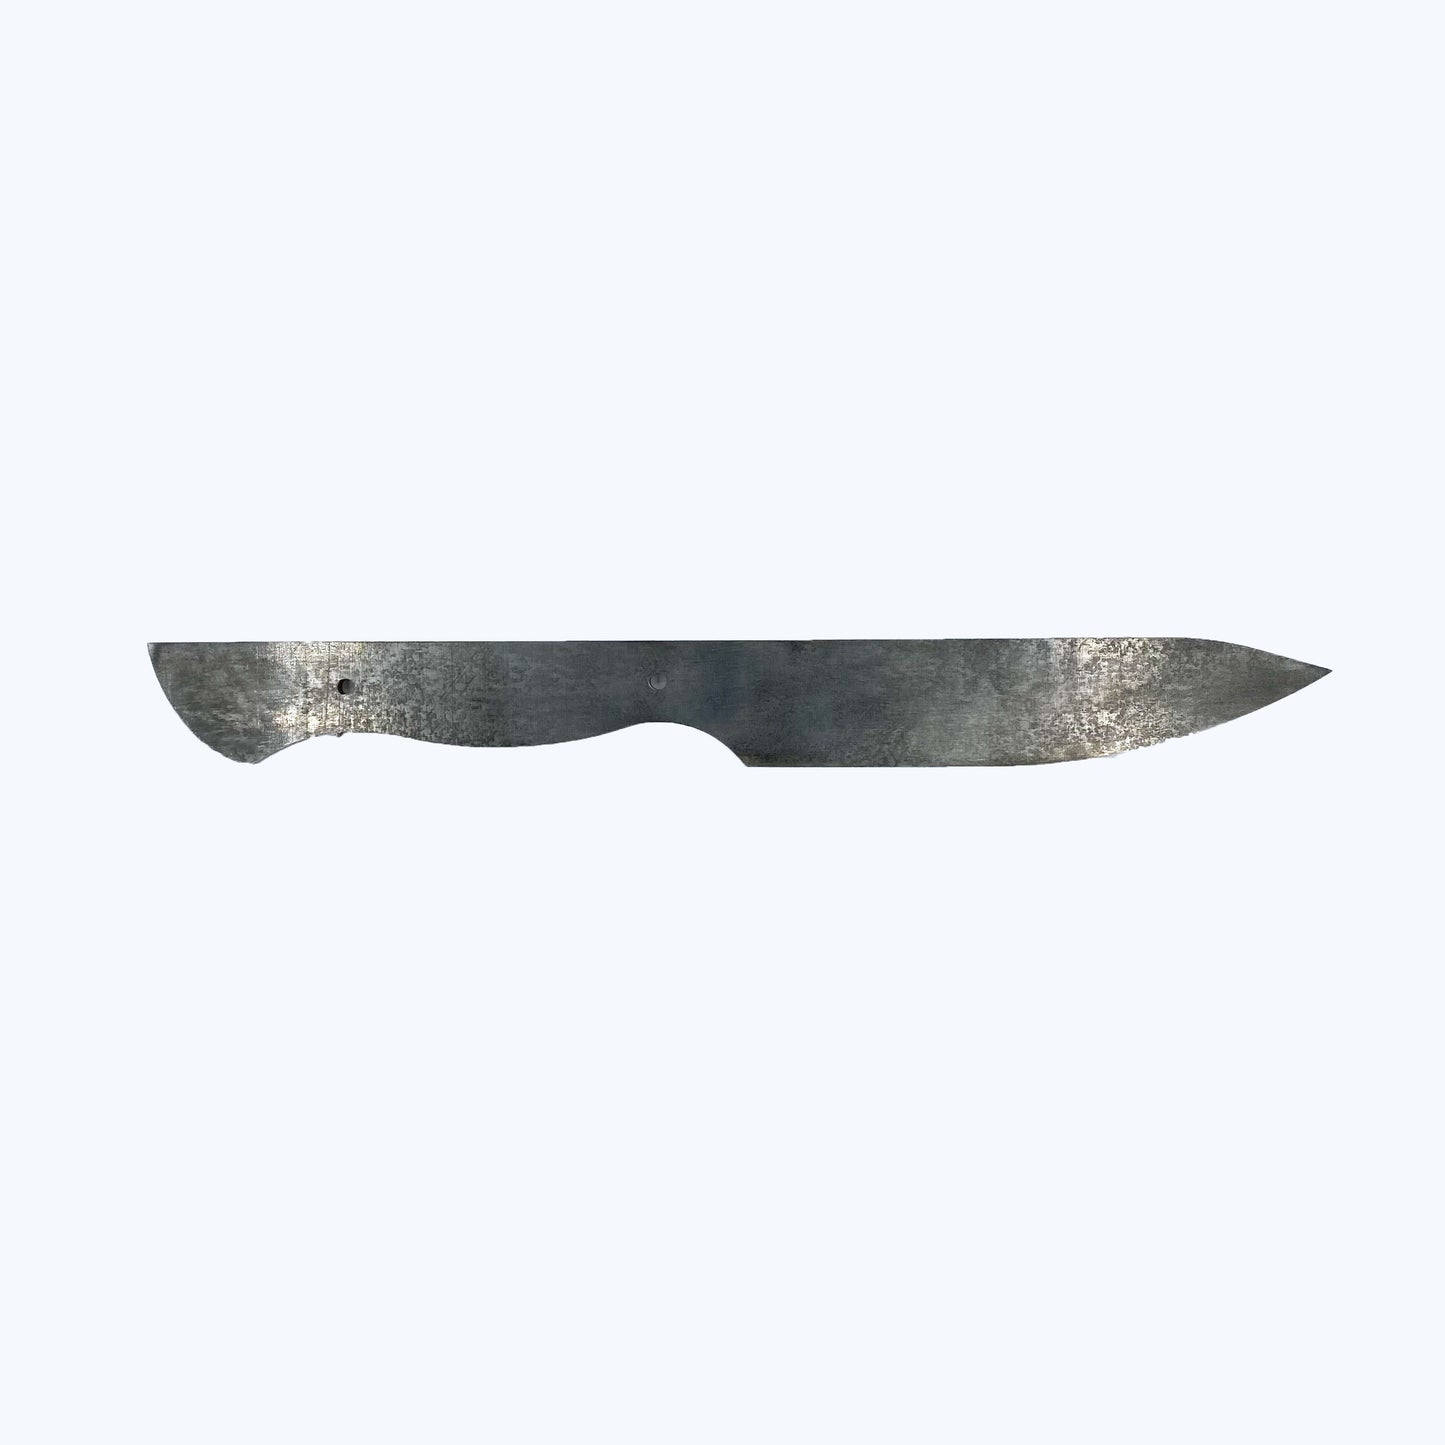 Paring Knife - High Carbon Stainless Steel